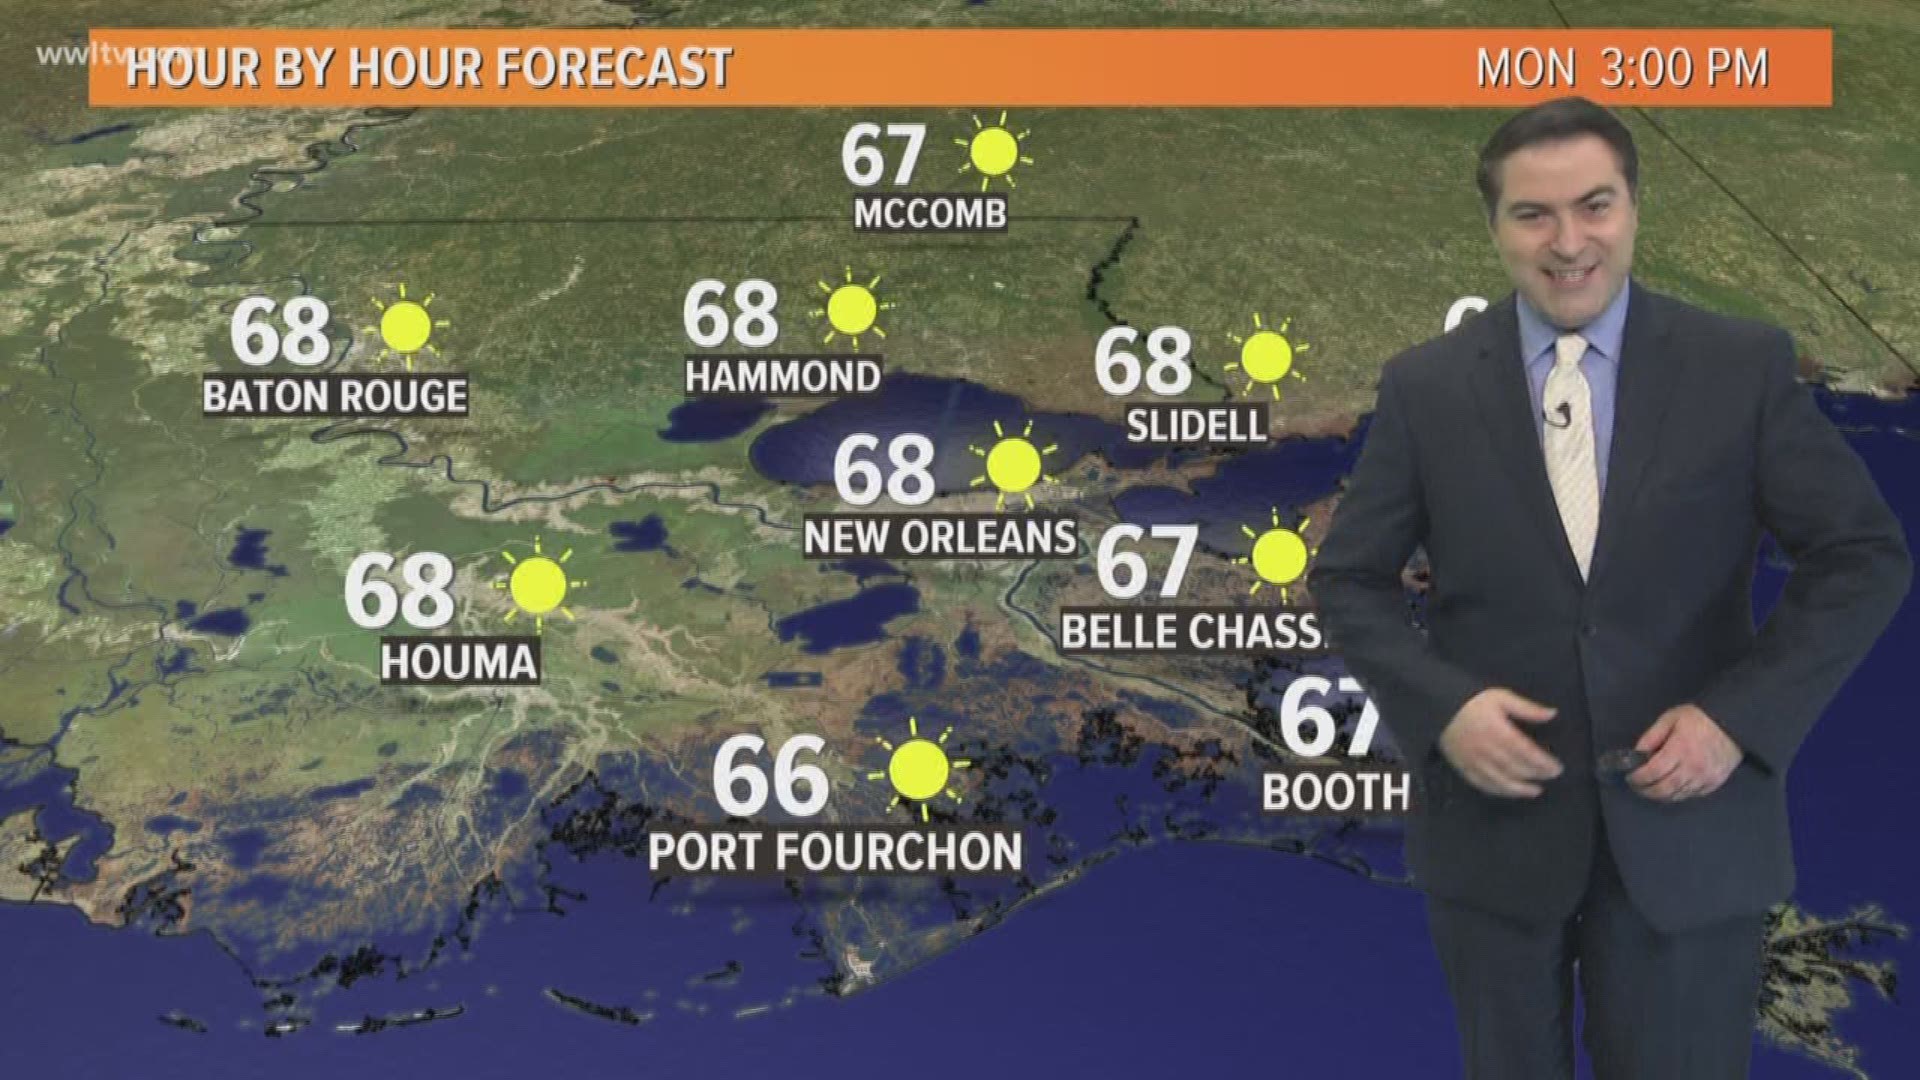 Meteorologist Dave Nussbaum says it will be a gorgeous day with plenty of sun and cool temperatures. 